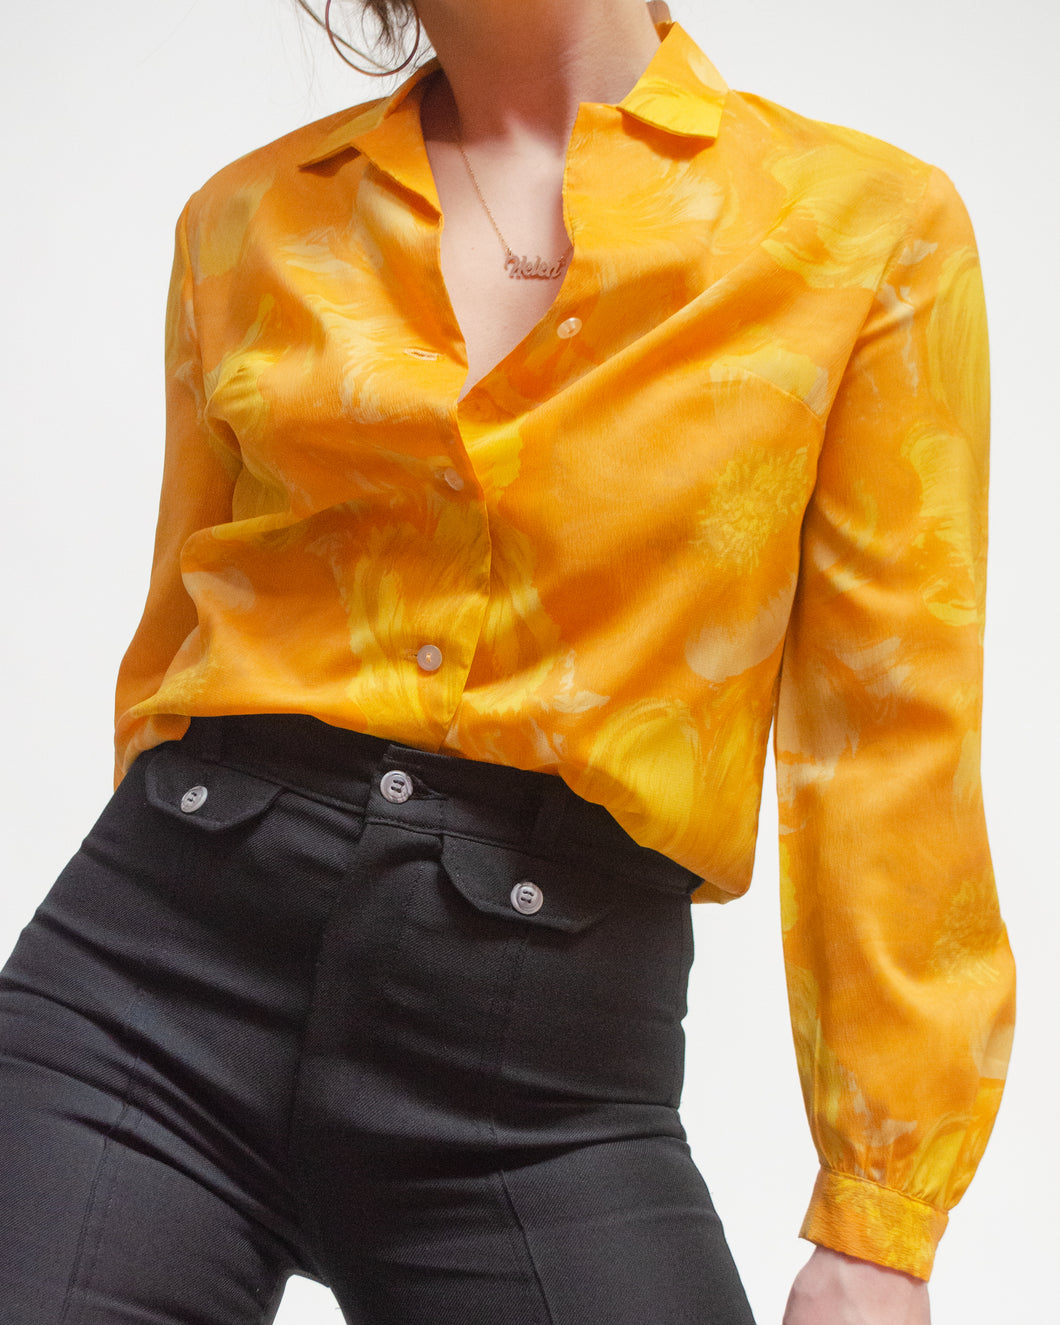 Marigold poly flower button up